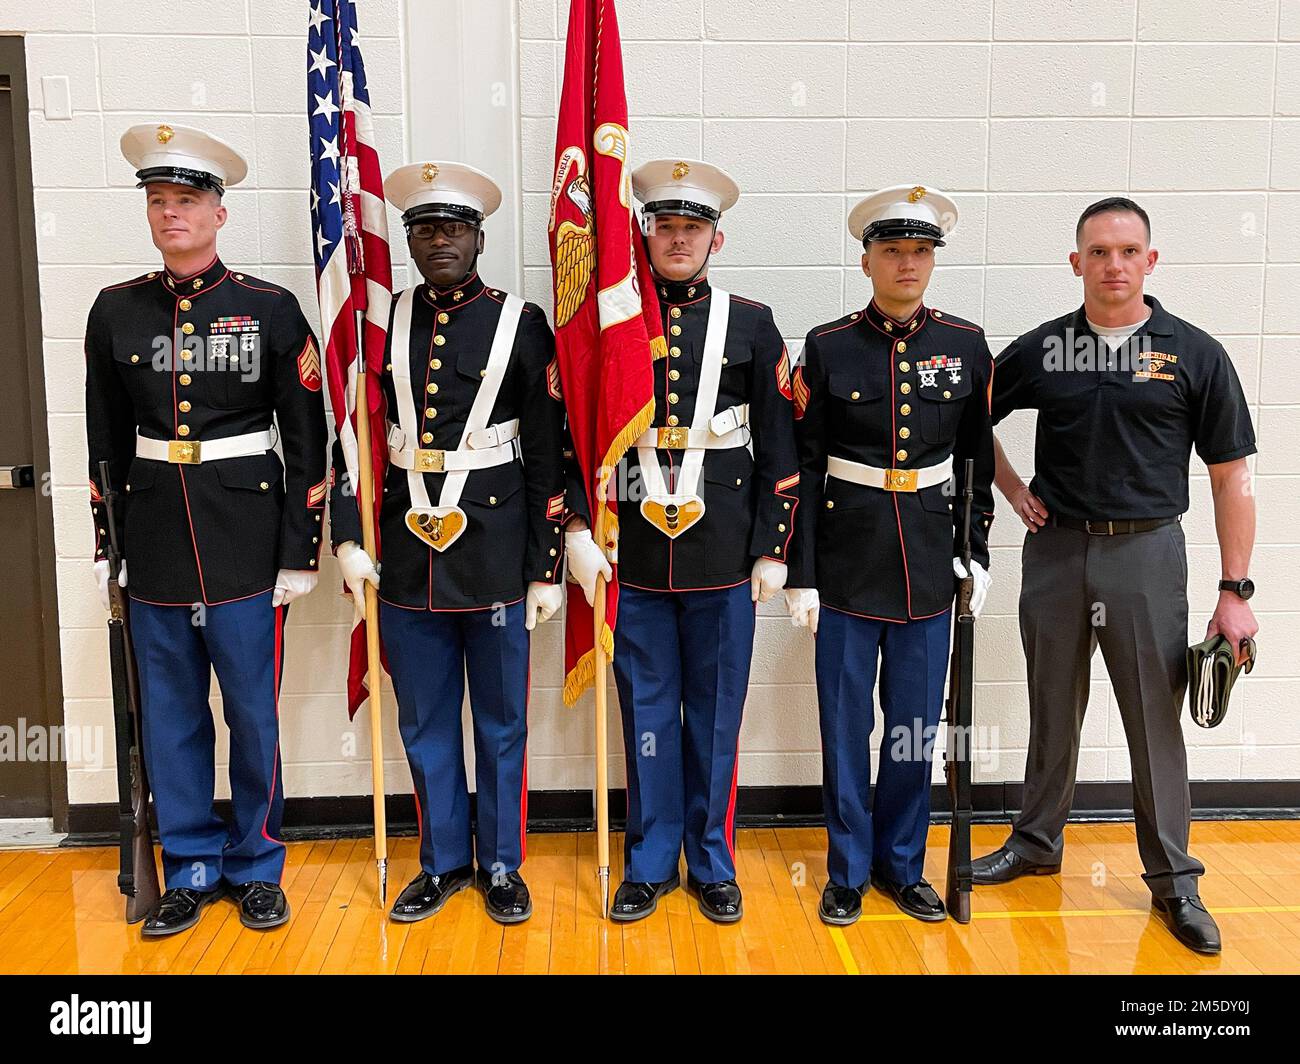 1st Battalion 24th Marines Weapon Company's color guard gets ready to present the Marine Corps flag at the final ceremony at Adrian College in Adrian, Michigan on March 05, 2022. The United States Marine Corps and the NCAA partnered up to host the National Collegiate Women’s Wrestling Championships in order to build good relations with Colleges and pave way for young potential future United States Marine Corps Officers. (United States Marine Corps photo by Cpl. Cheng Chang) Stock Photo